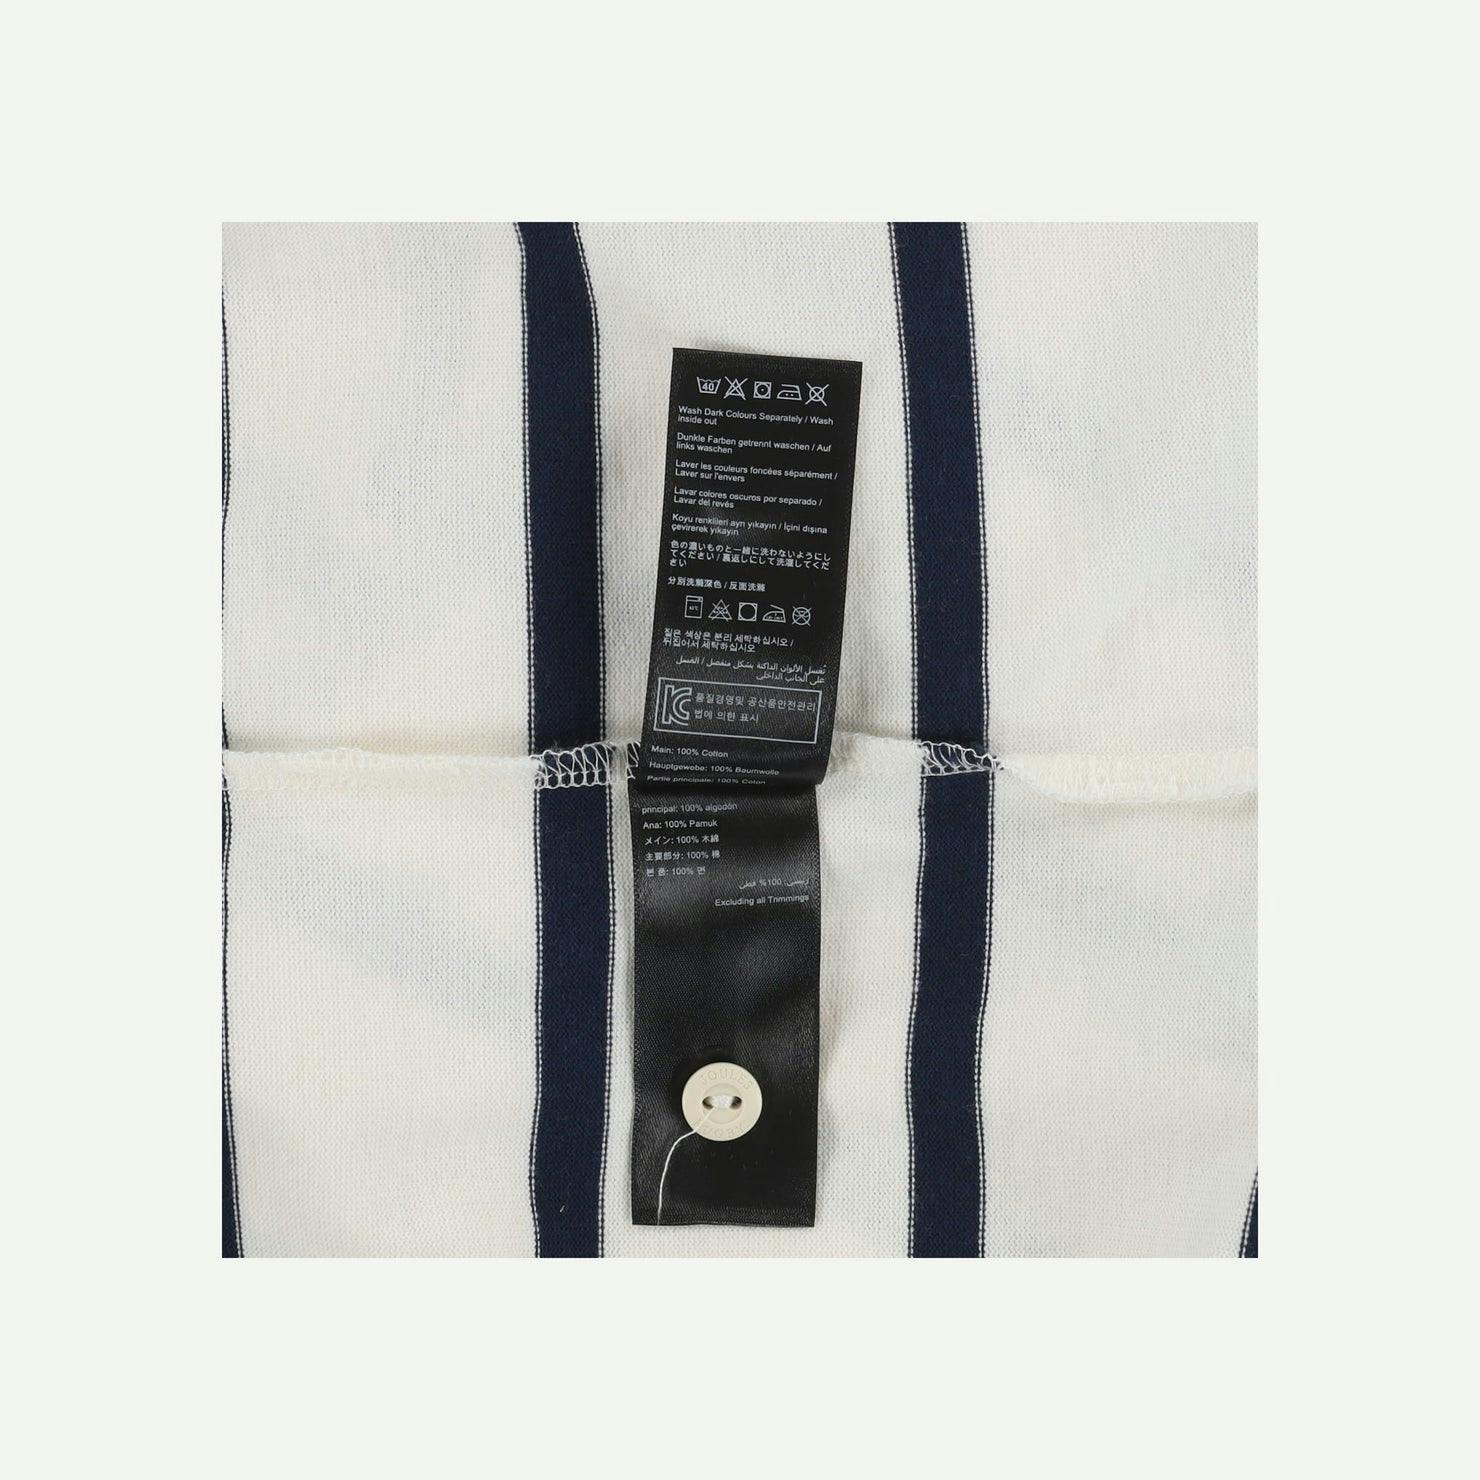 Joules As new White Polo Shirt